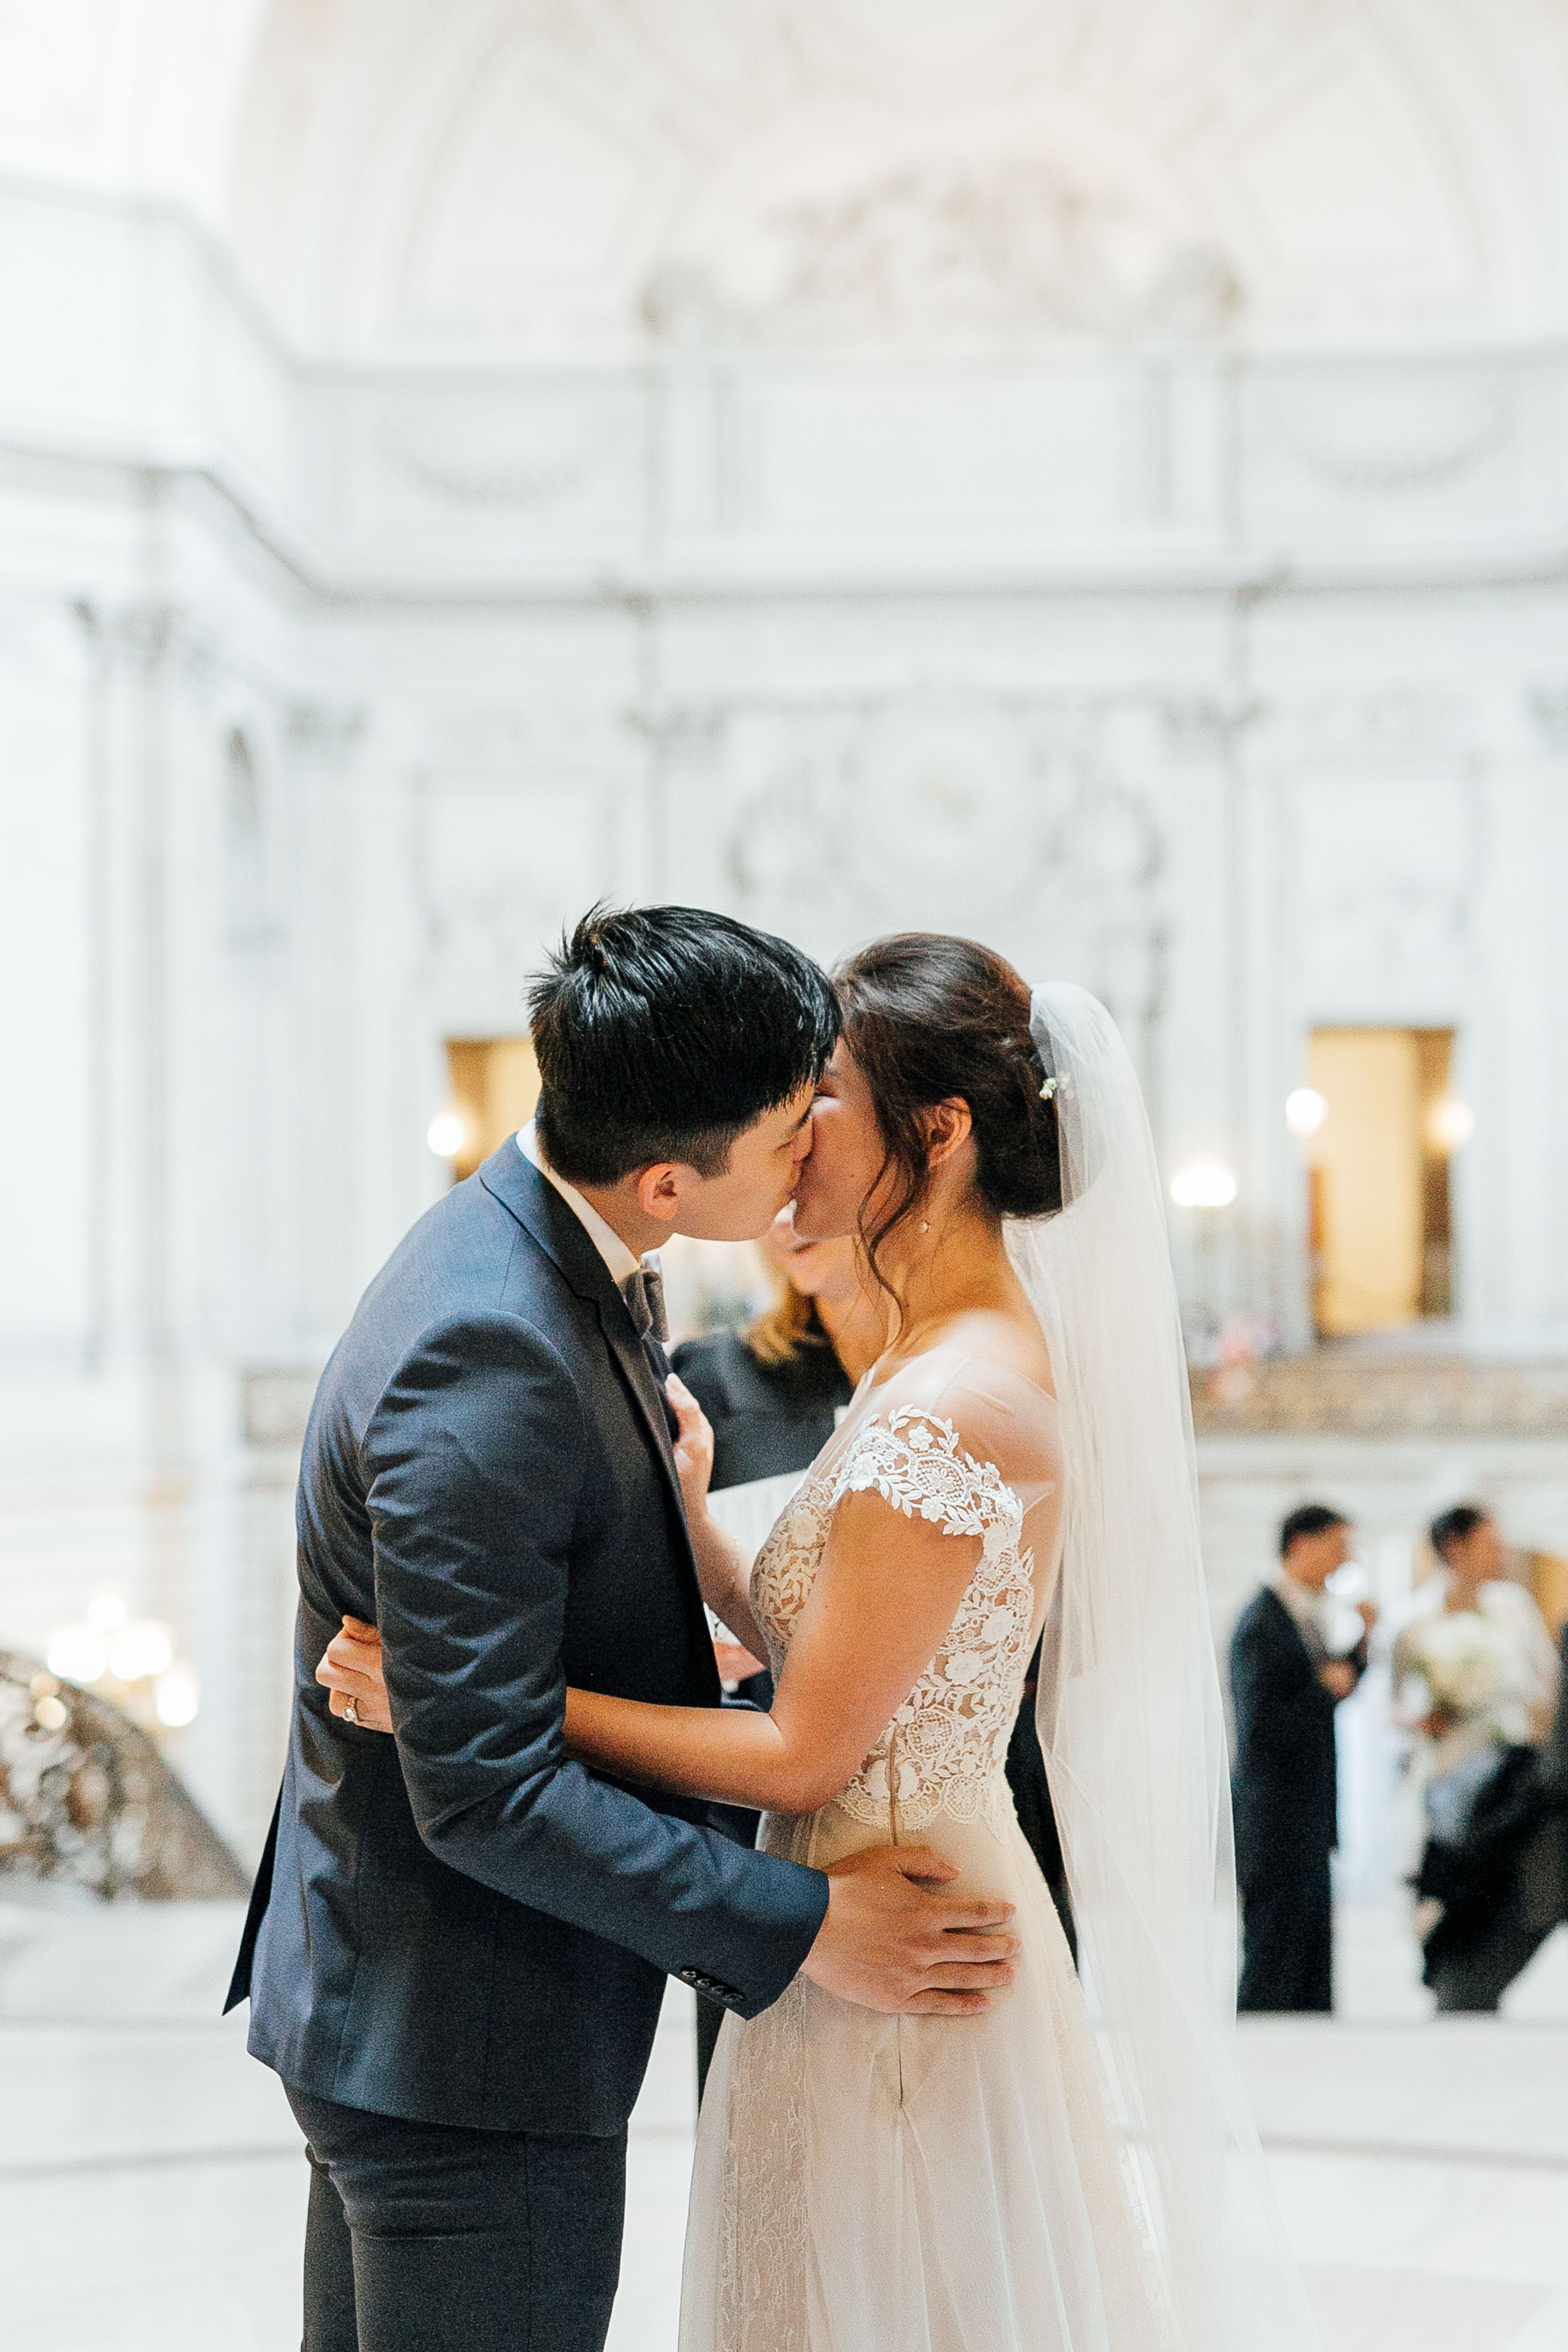 Groom kisses bride during ceremony